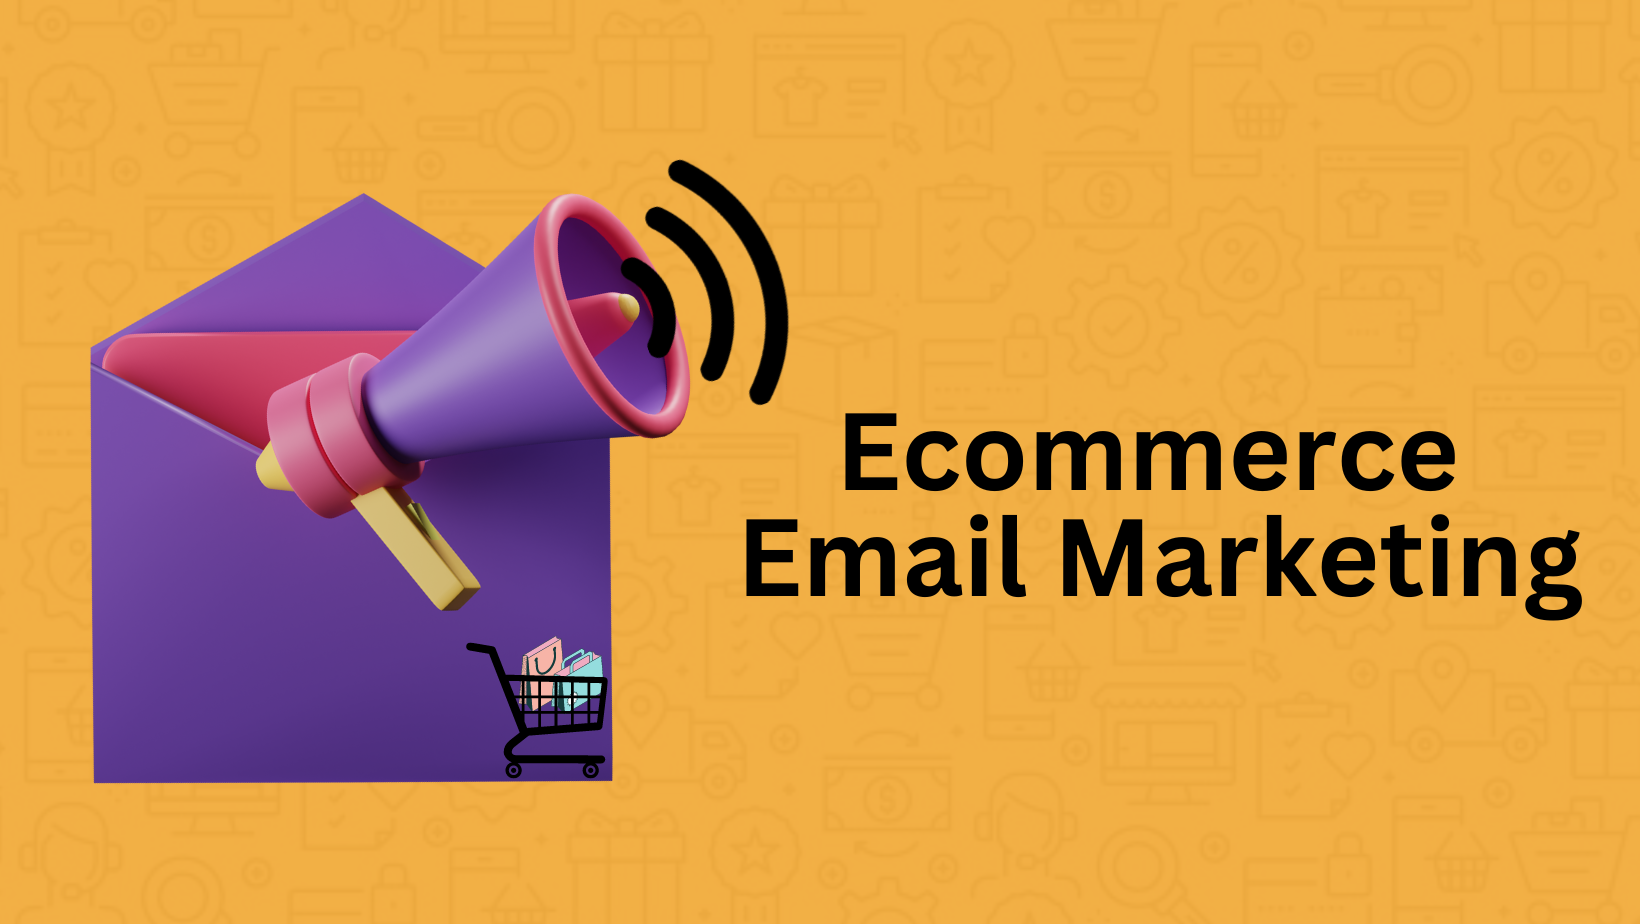 Email Marketing For Ecommerce Industry: A Quick Guide